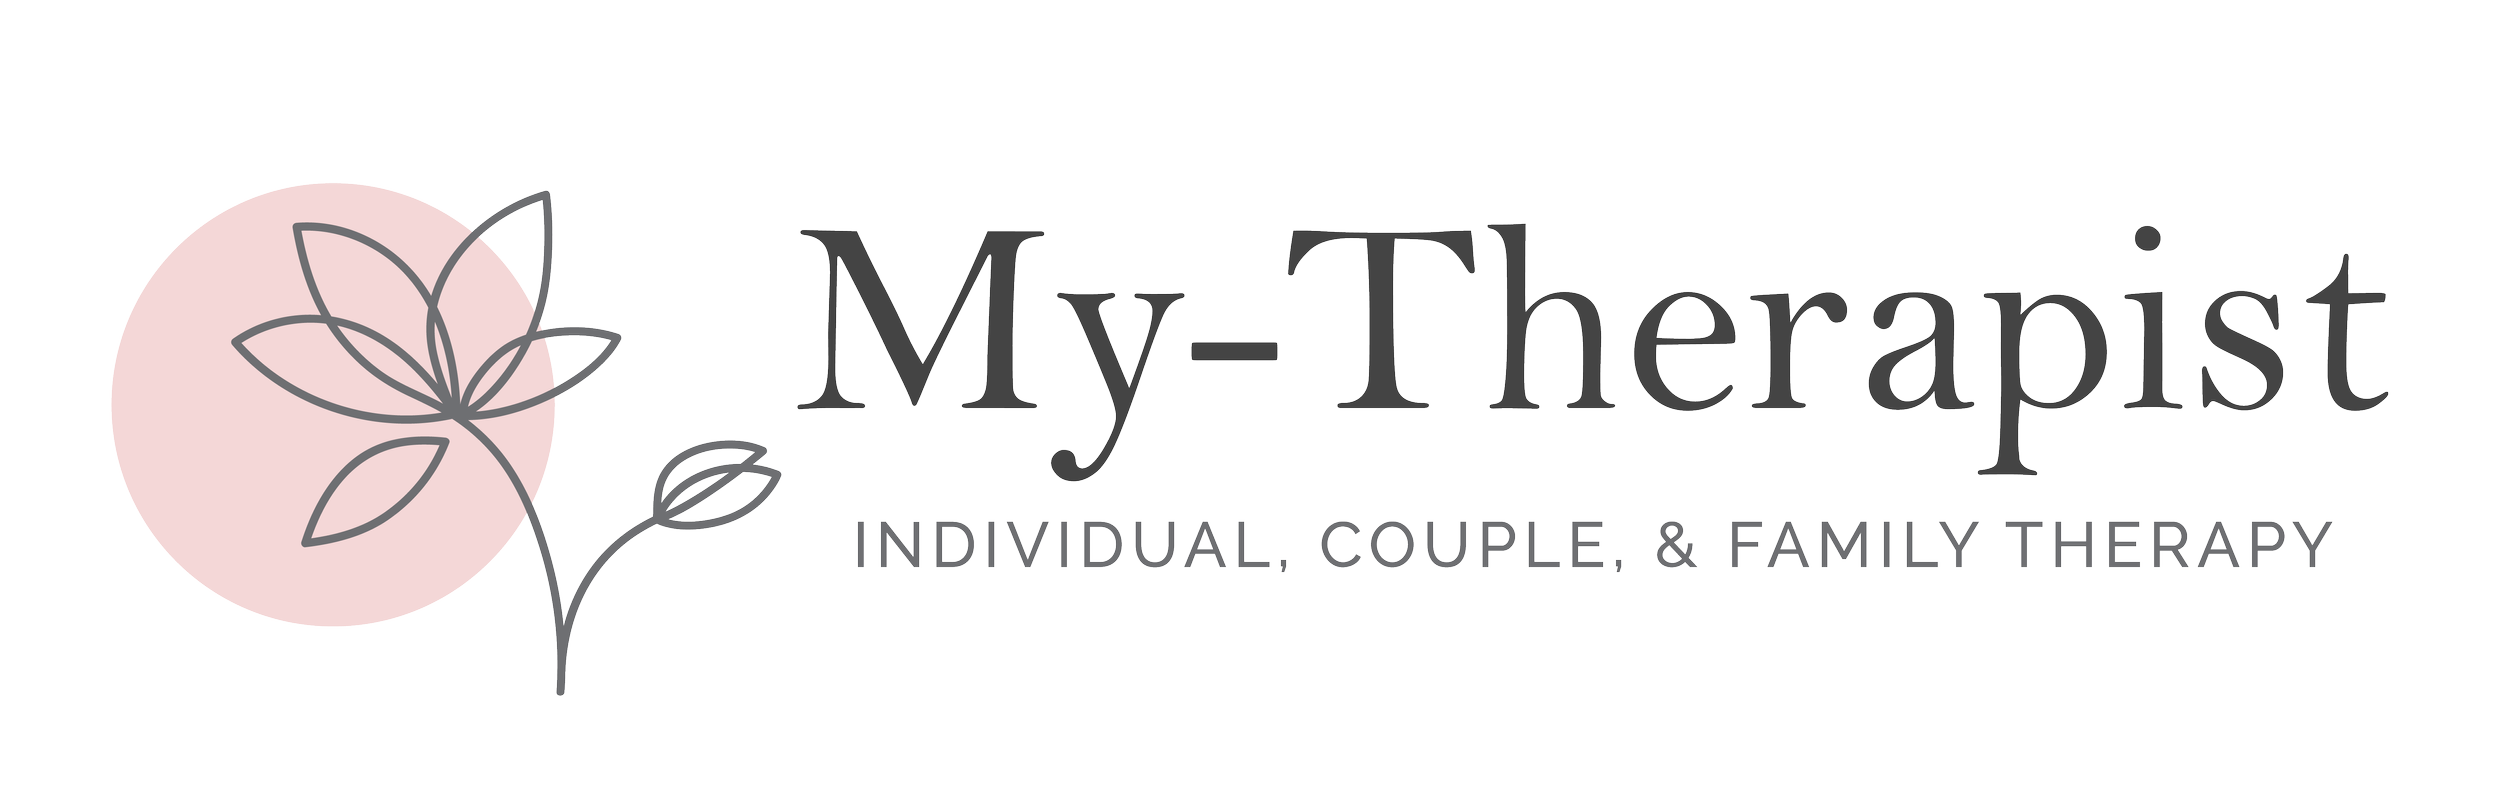 My-Therapist | Individual, Couple, &amp;  Family Therapy in Wake Forest, NC